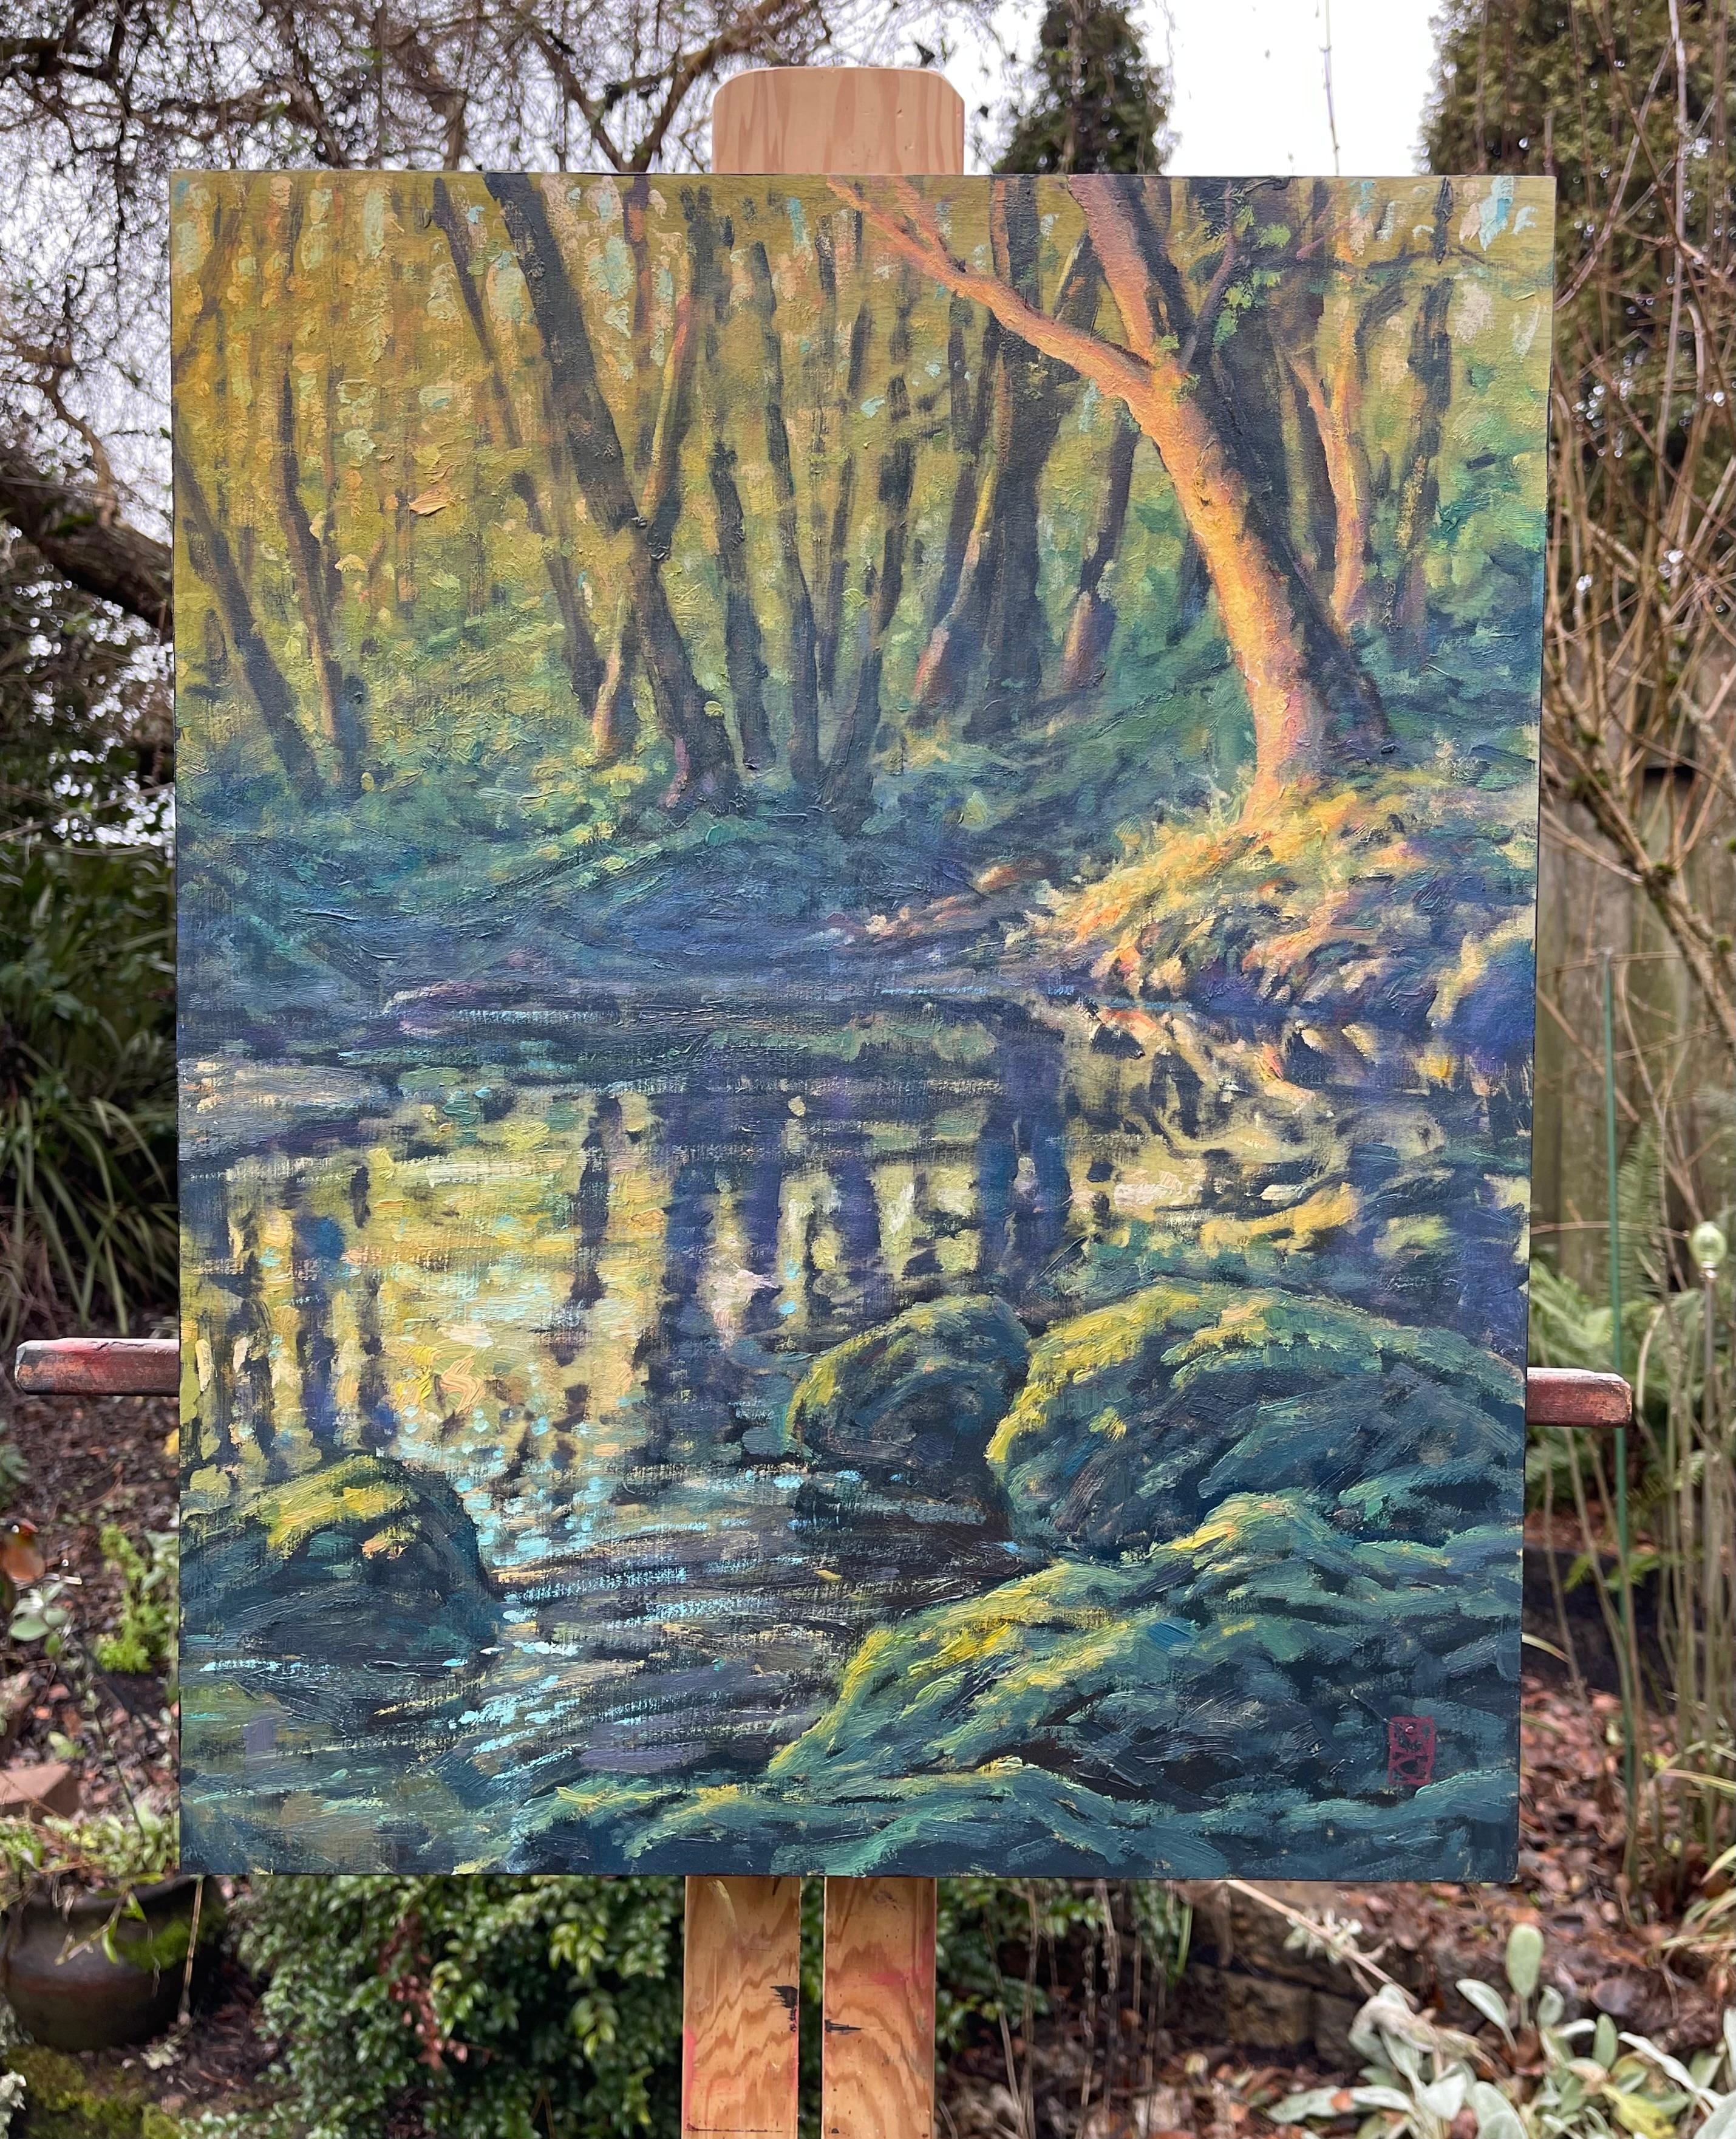 <p>Artist Comments<br>Artist Michael Orwick exhibits an impressionistic piece capturing a serene summer day in an idyllic forest setting. Warm hazy sunlight illuminates the vibrant colors of the foliage, while cool shadows settle in the far reaches